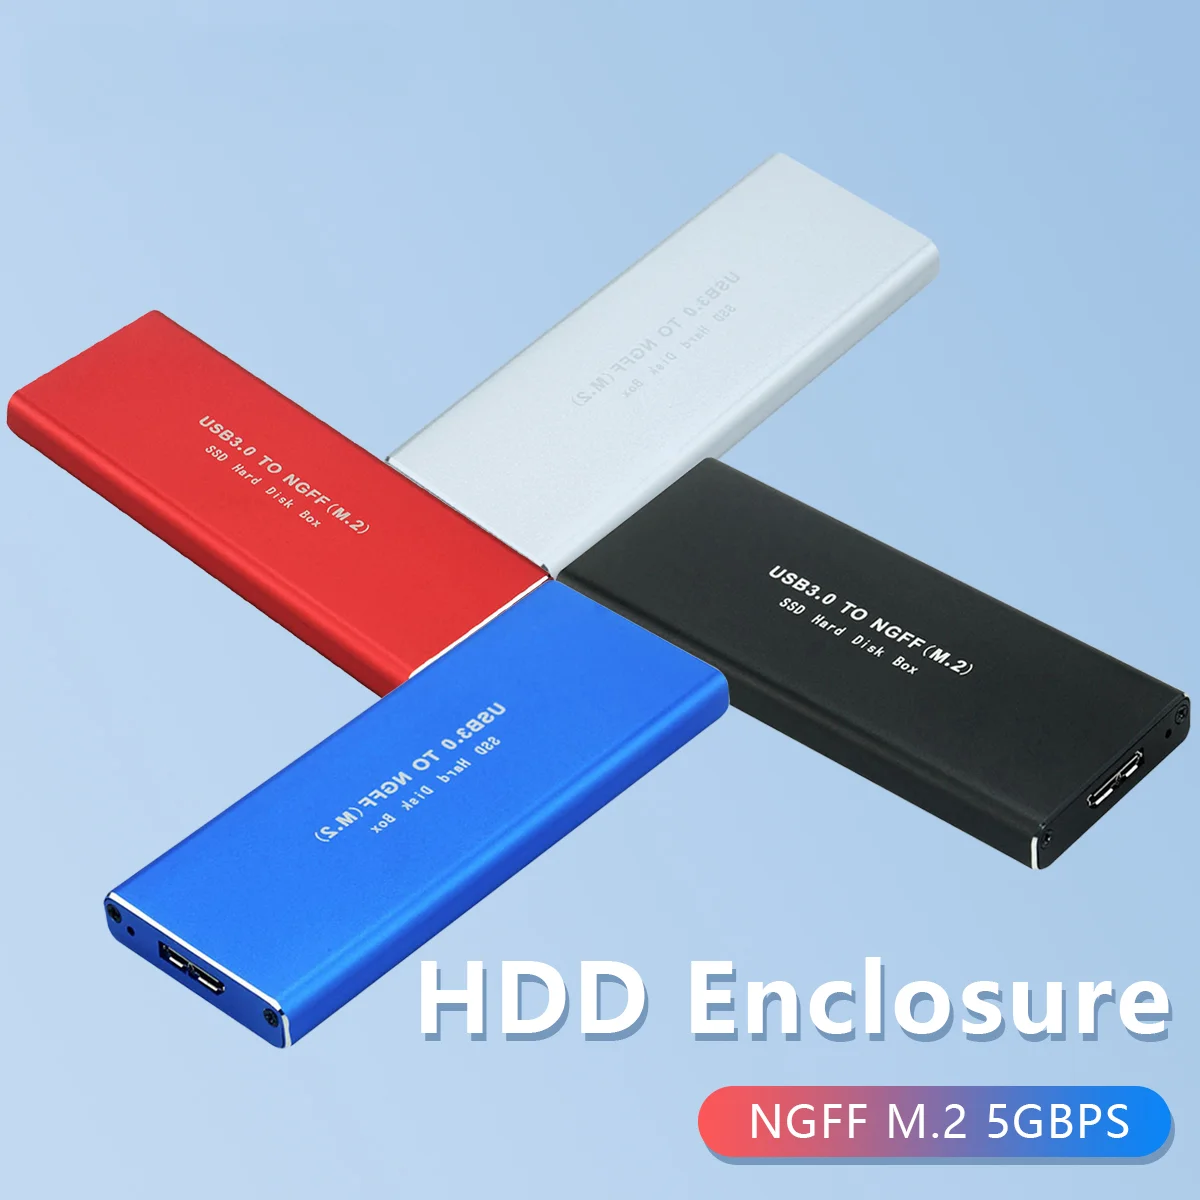 

NGFF Hard Disk External M.2 Solid State 5GBPS SSD Cooling Metal Case USB3.0 PC for 2230/2242/2260/2280 Mobile HDD Enclosure